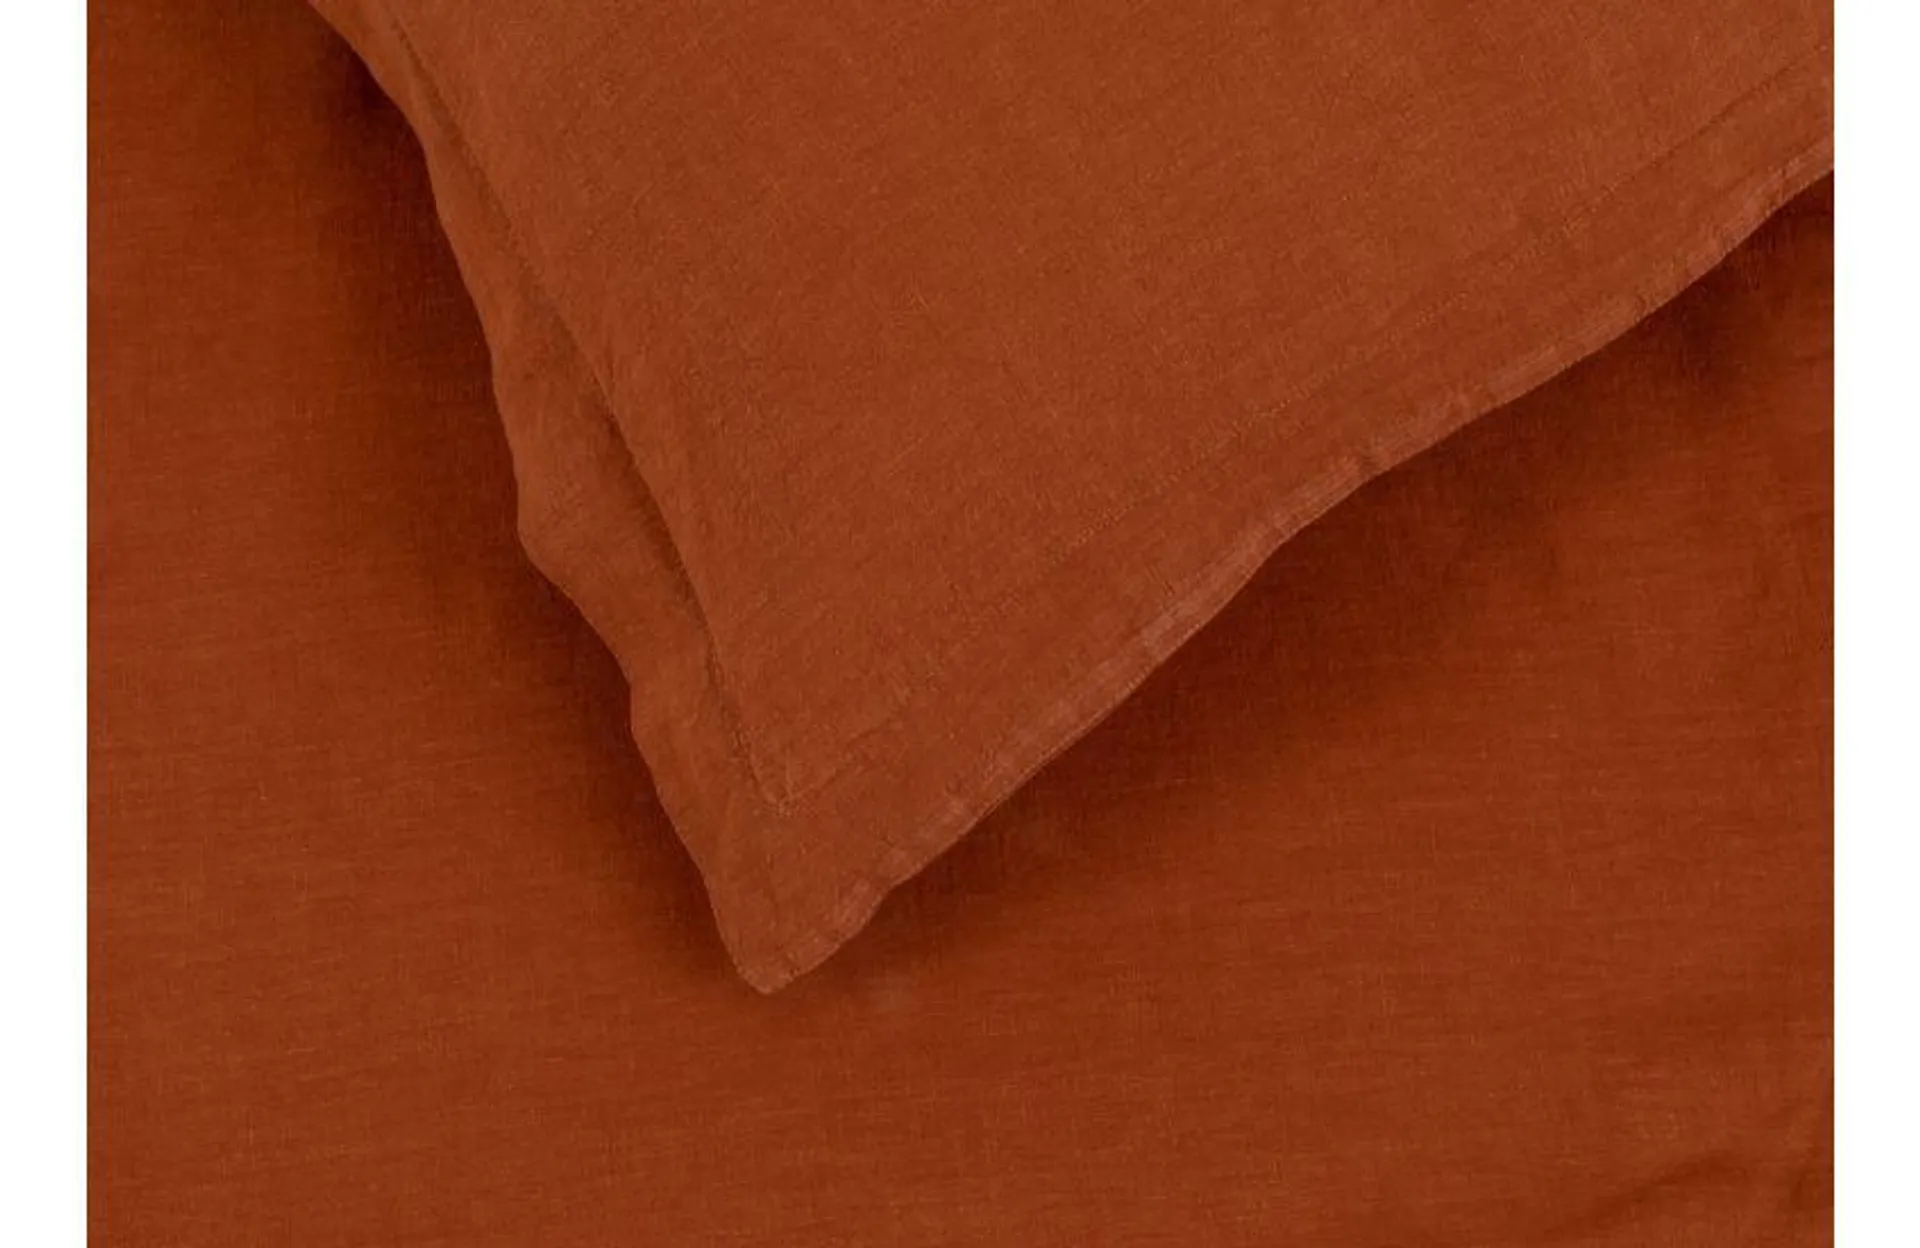 Washed Linen Cinnamon Fitted Sheet King